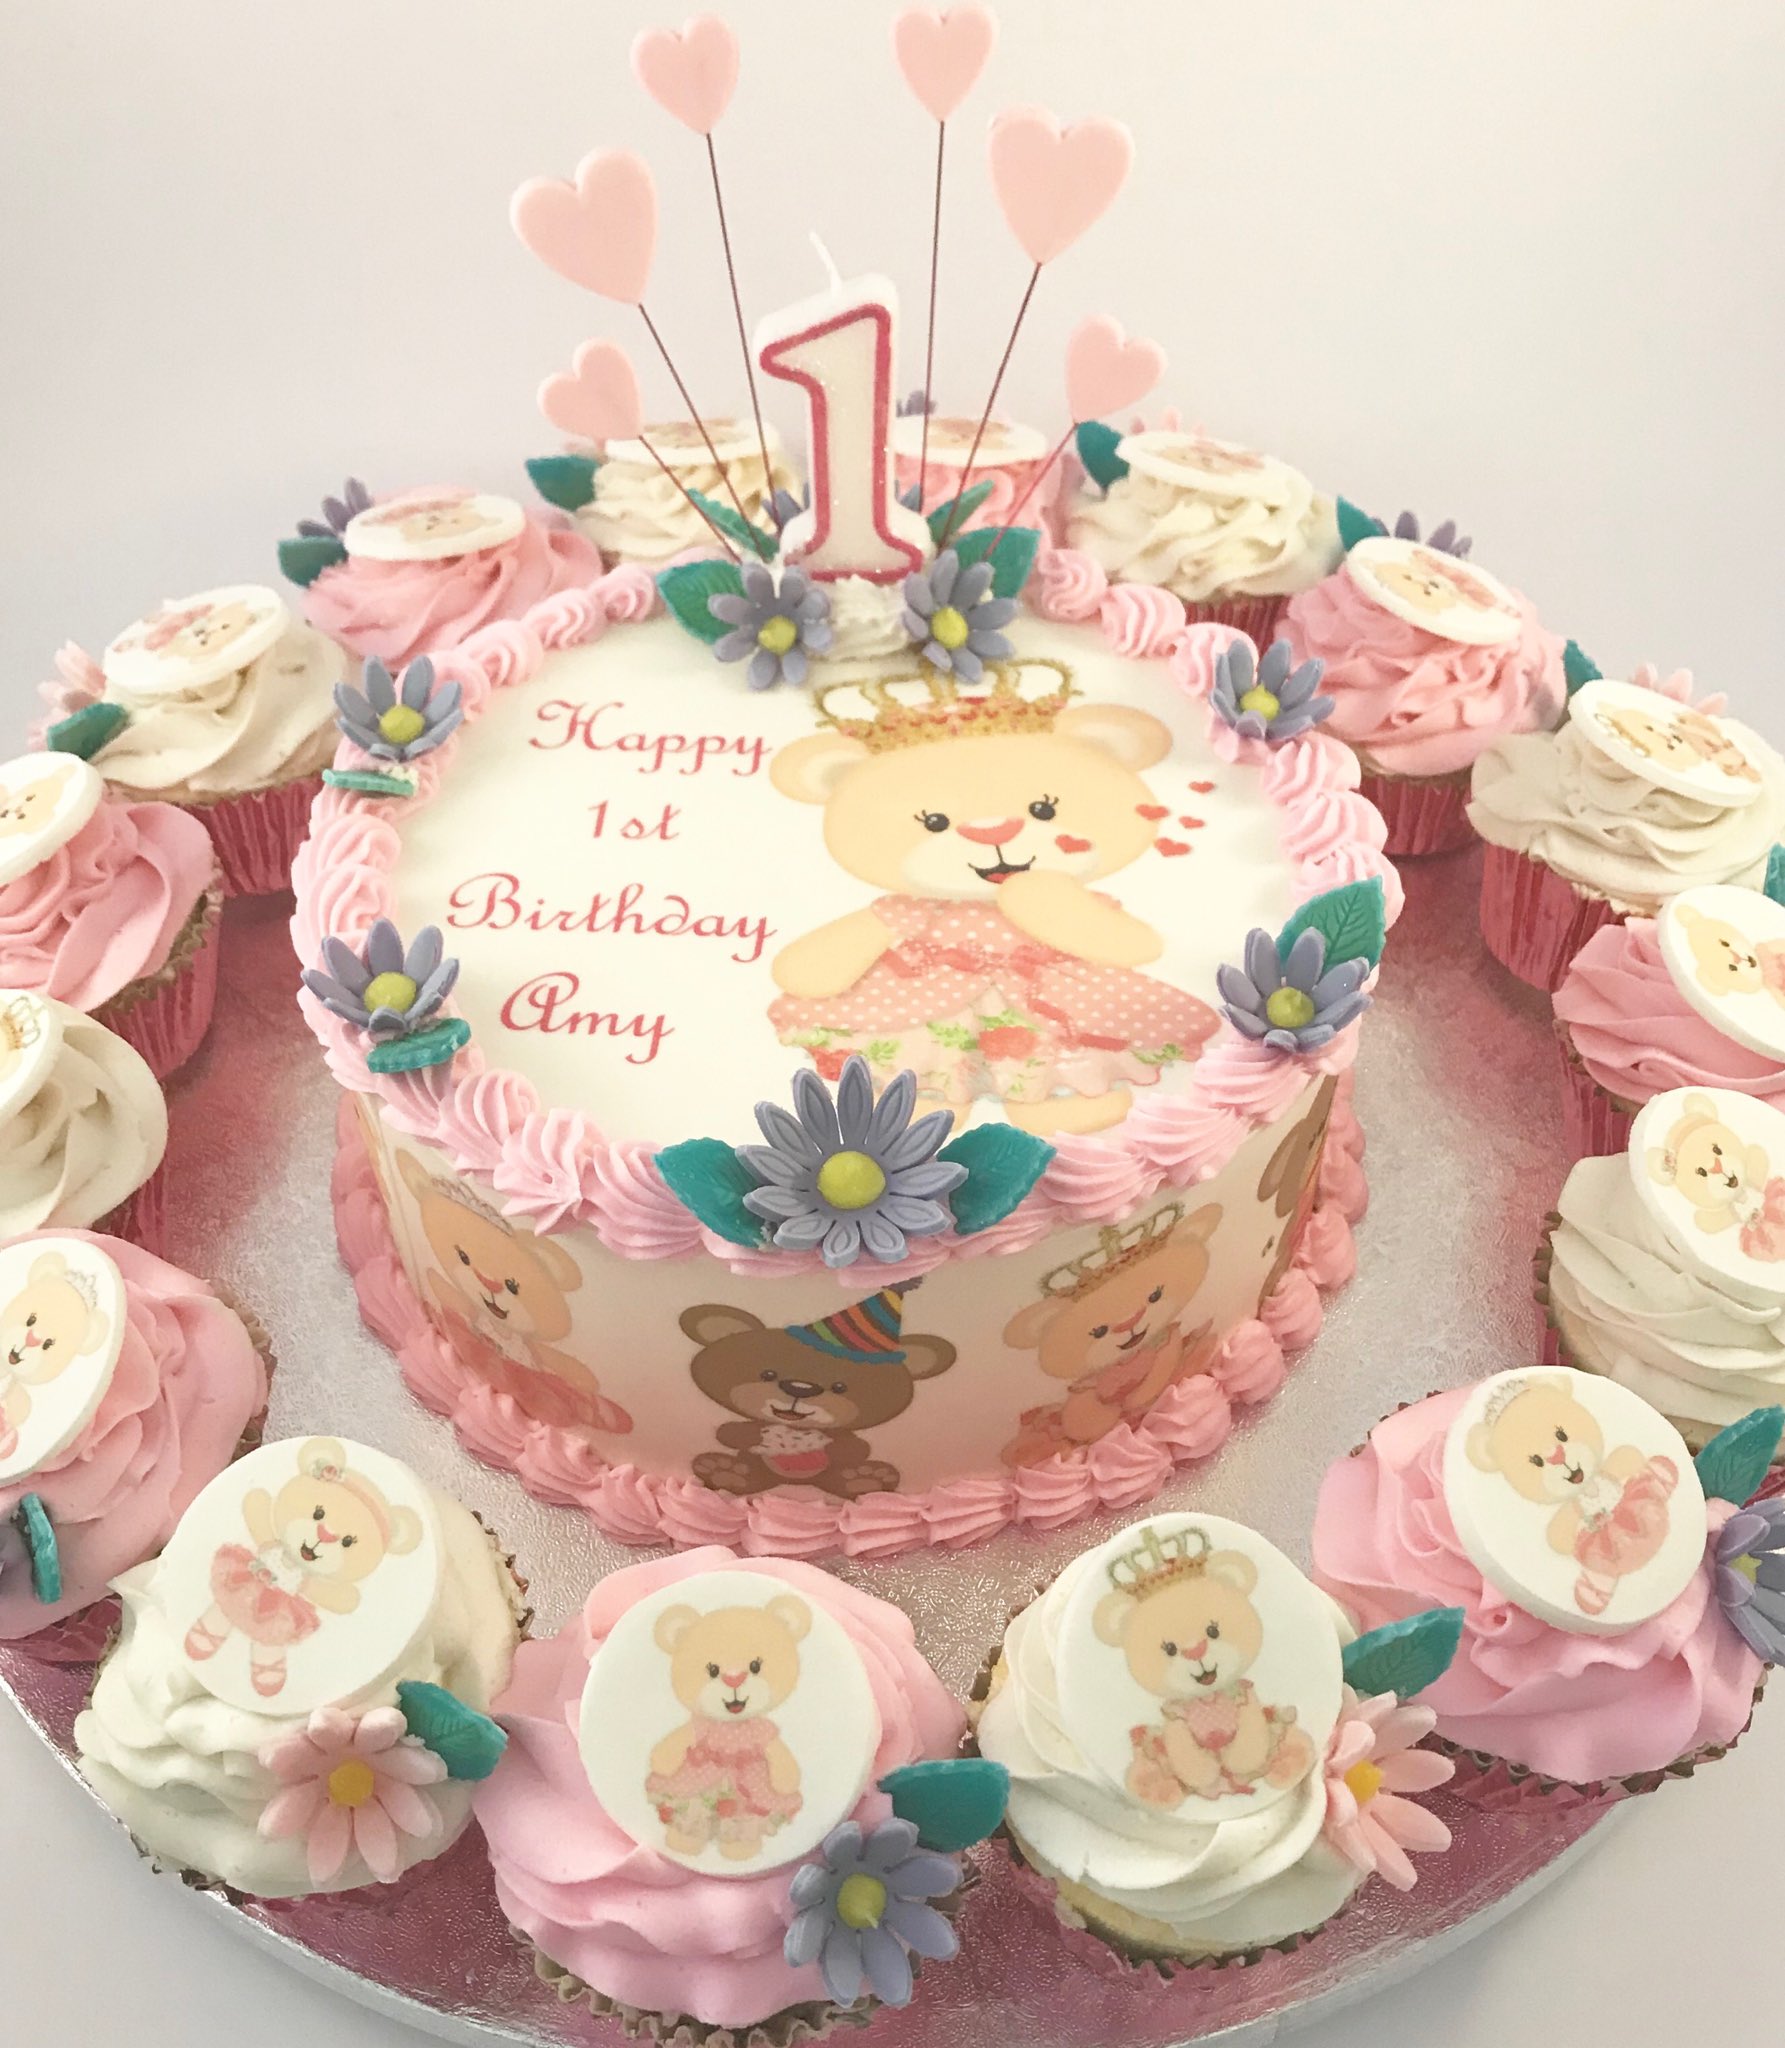 Round Shaped Cake And A Teddy - Iris Florists mangalore online delivery of  flowers,cakes, arrangements and decorations